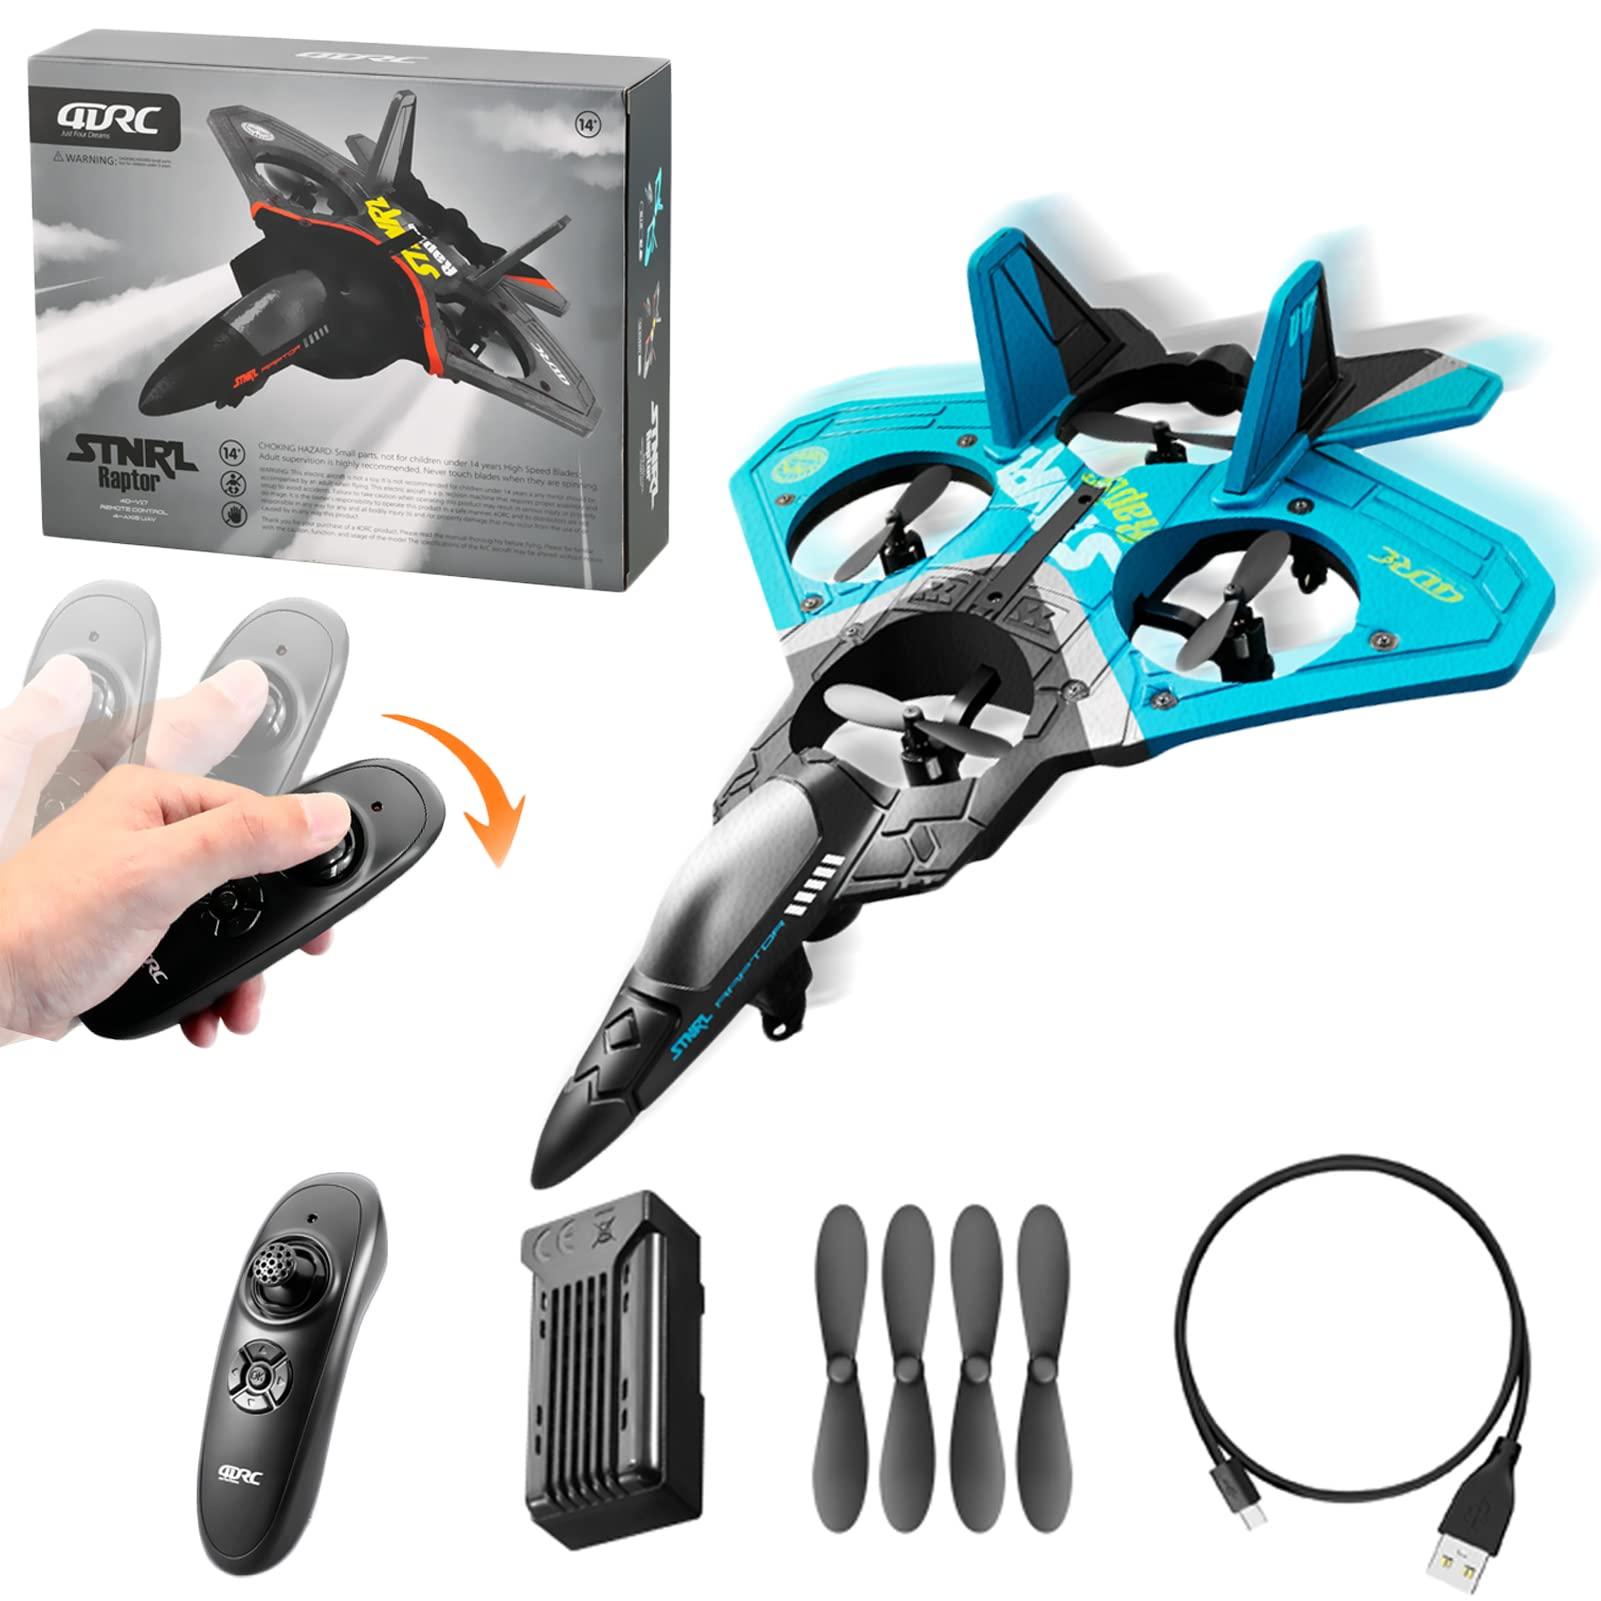 Fighter Stunt Rc Airplane: Essential Accessories for High-Flying Fun